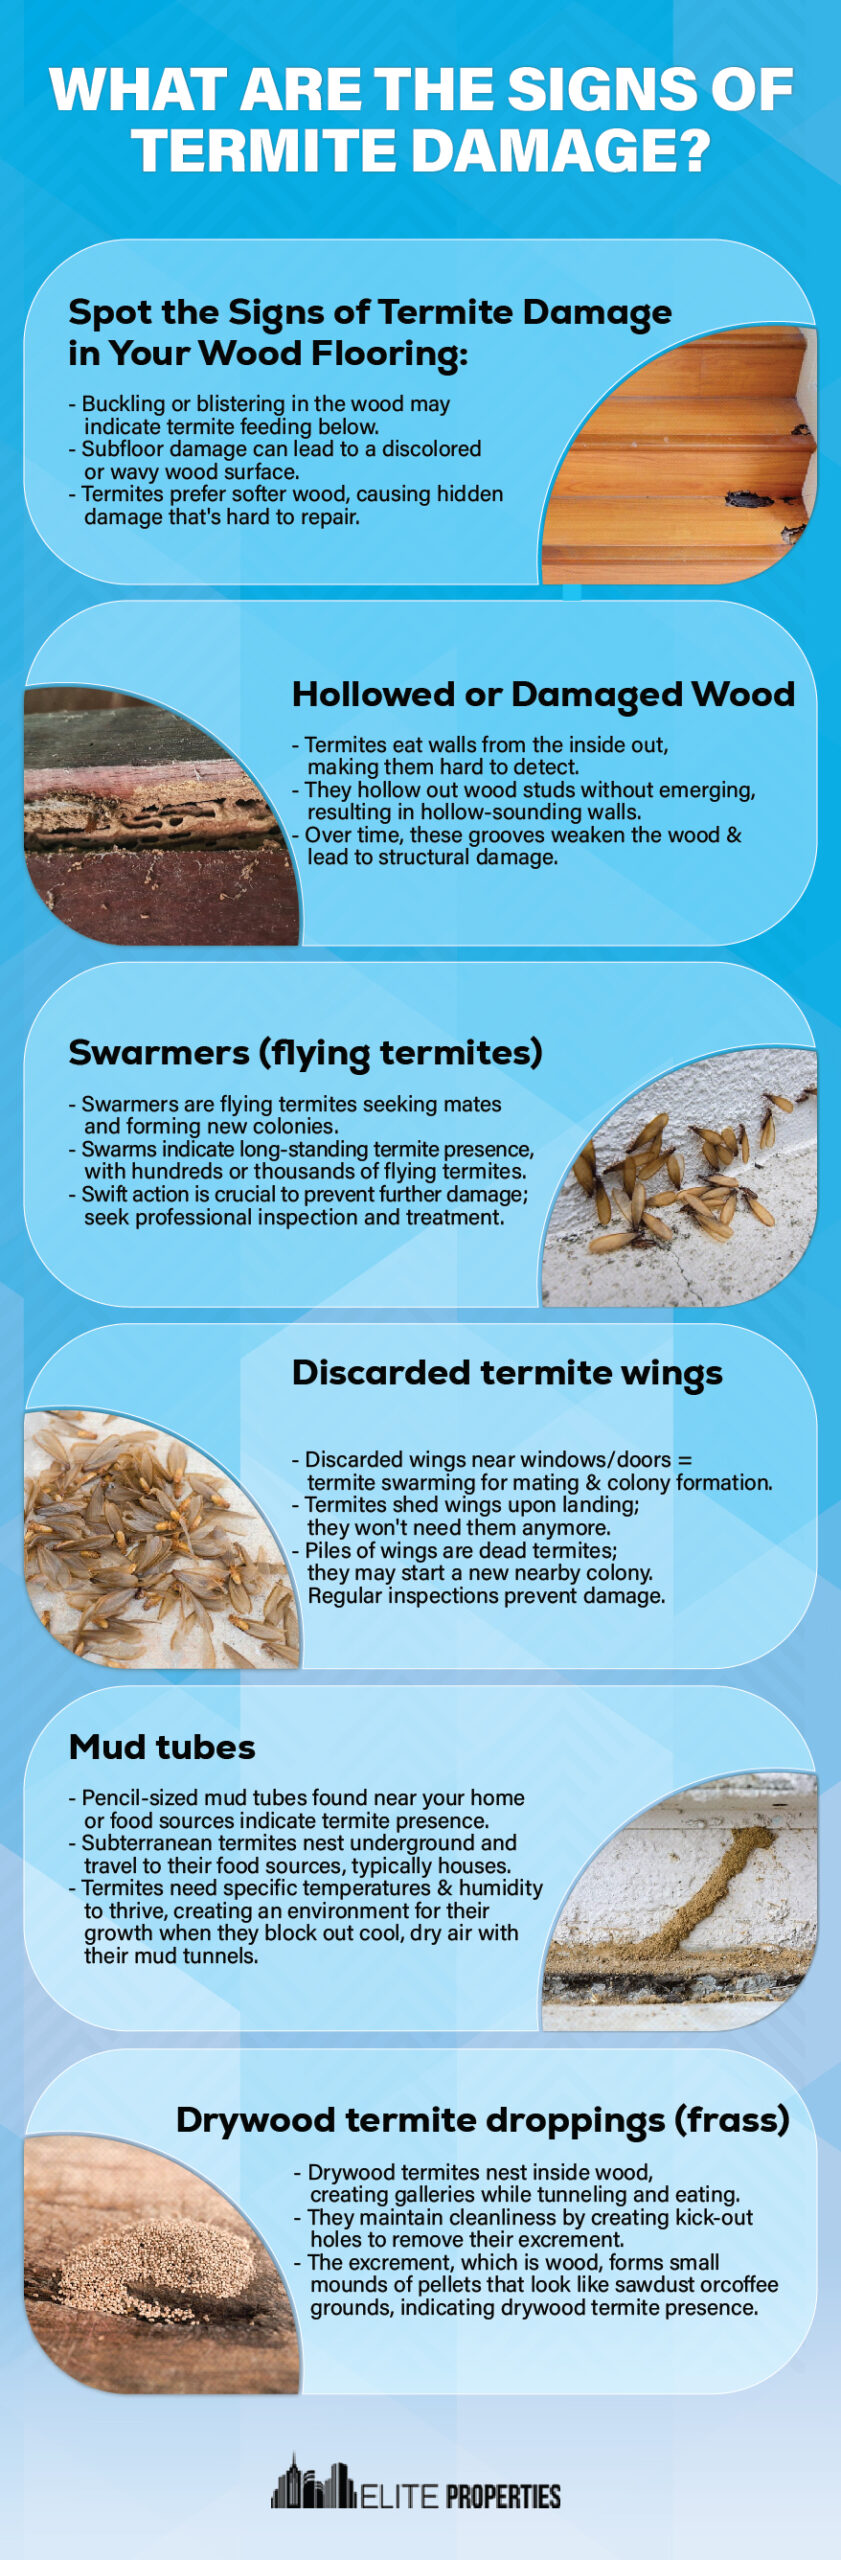 What are the signs of Termite damage